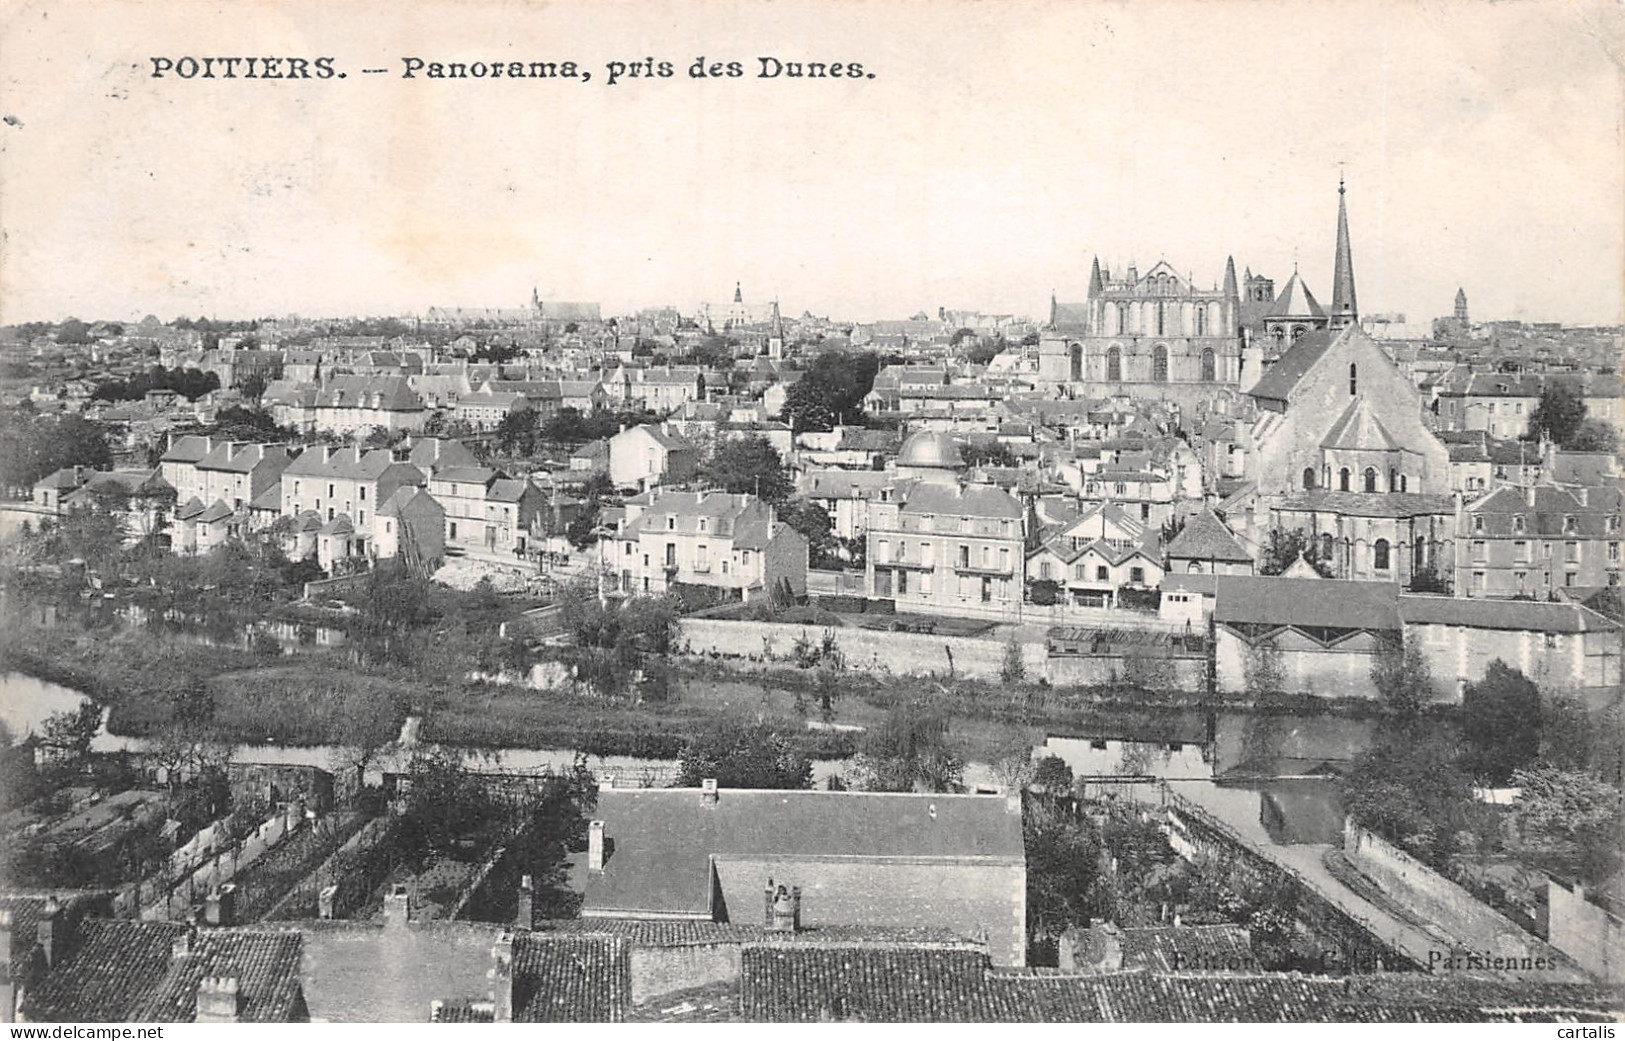 86-POITIERS-N°4189-G/0139 - Poitiers